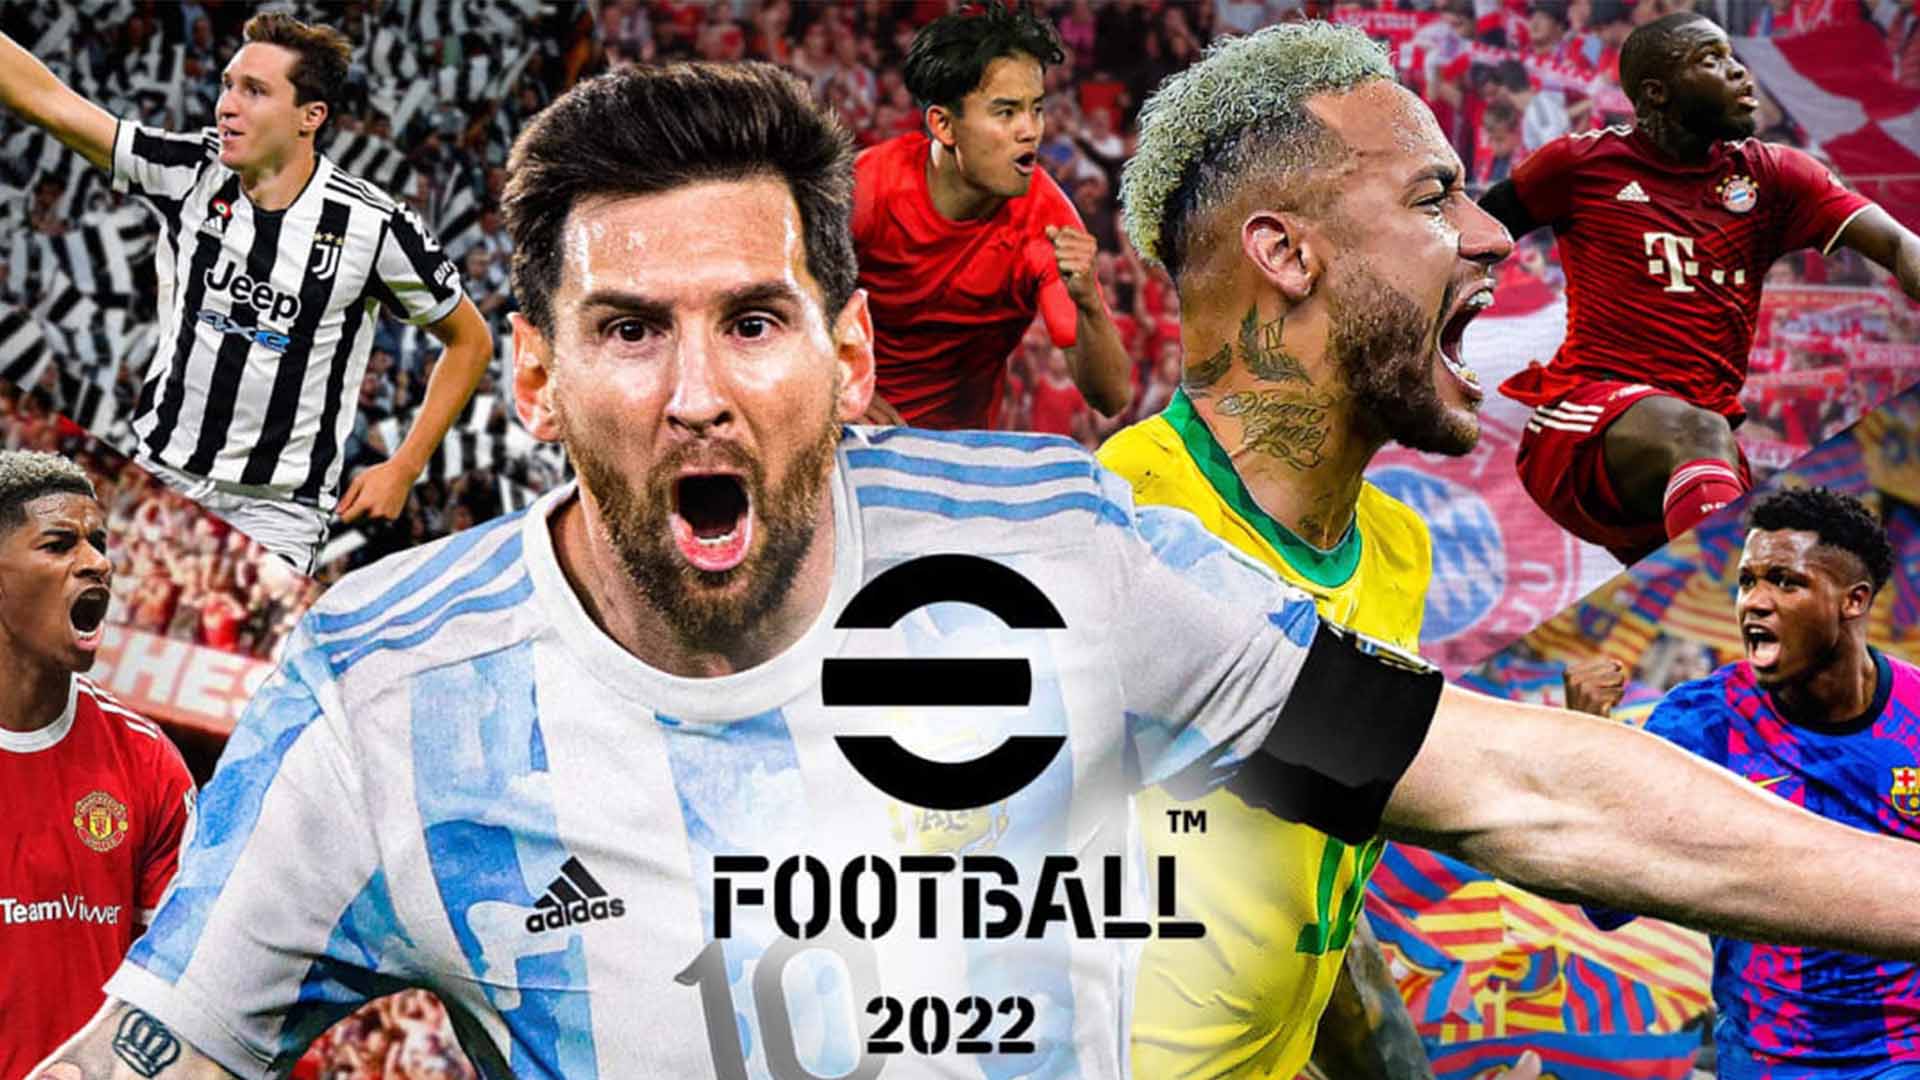 eFootball PES 2022: New Name, Gameplay Changes, Trailer And More